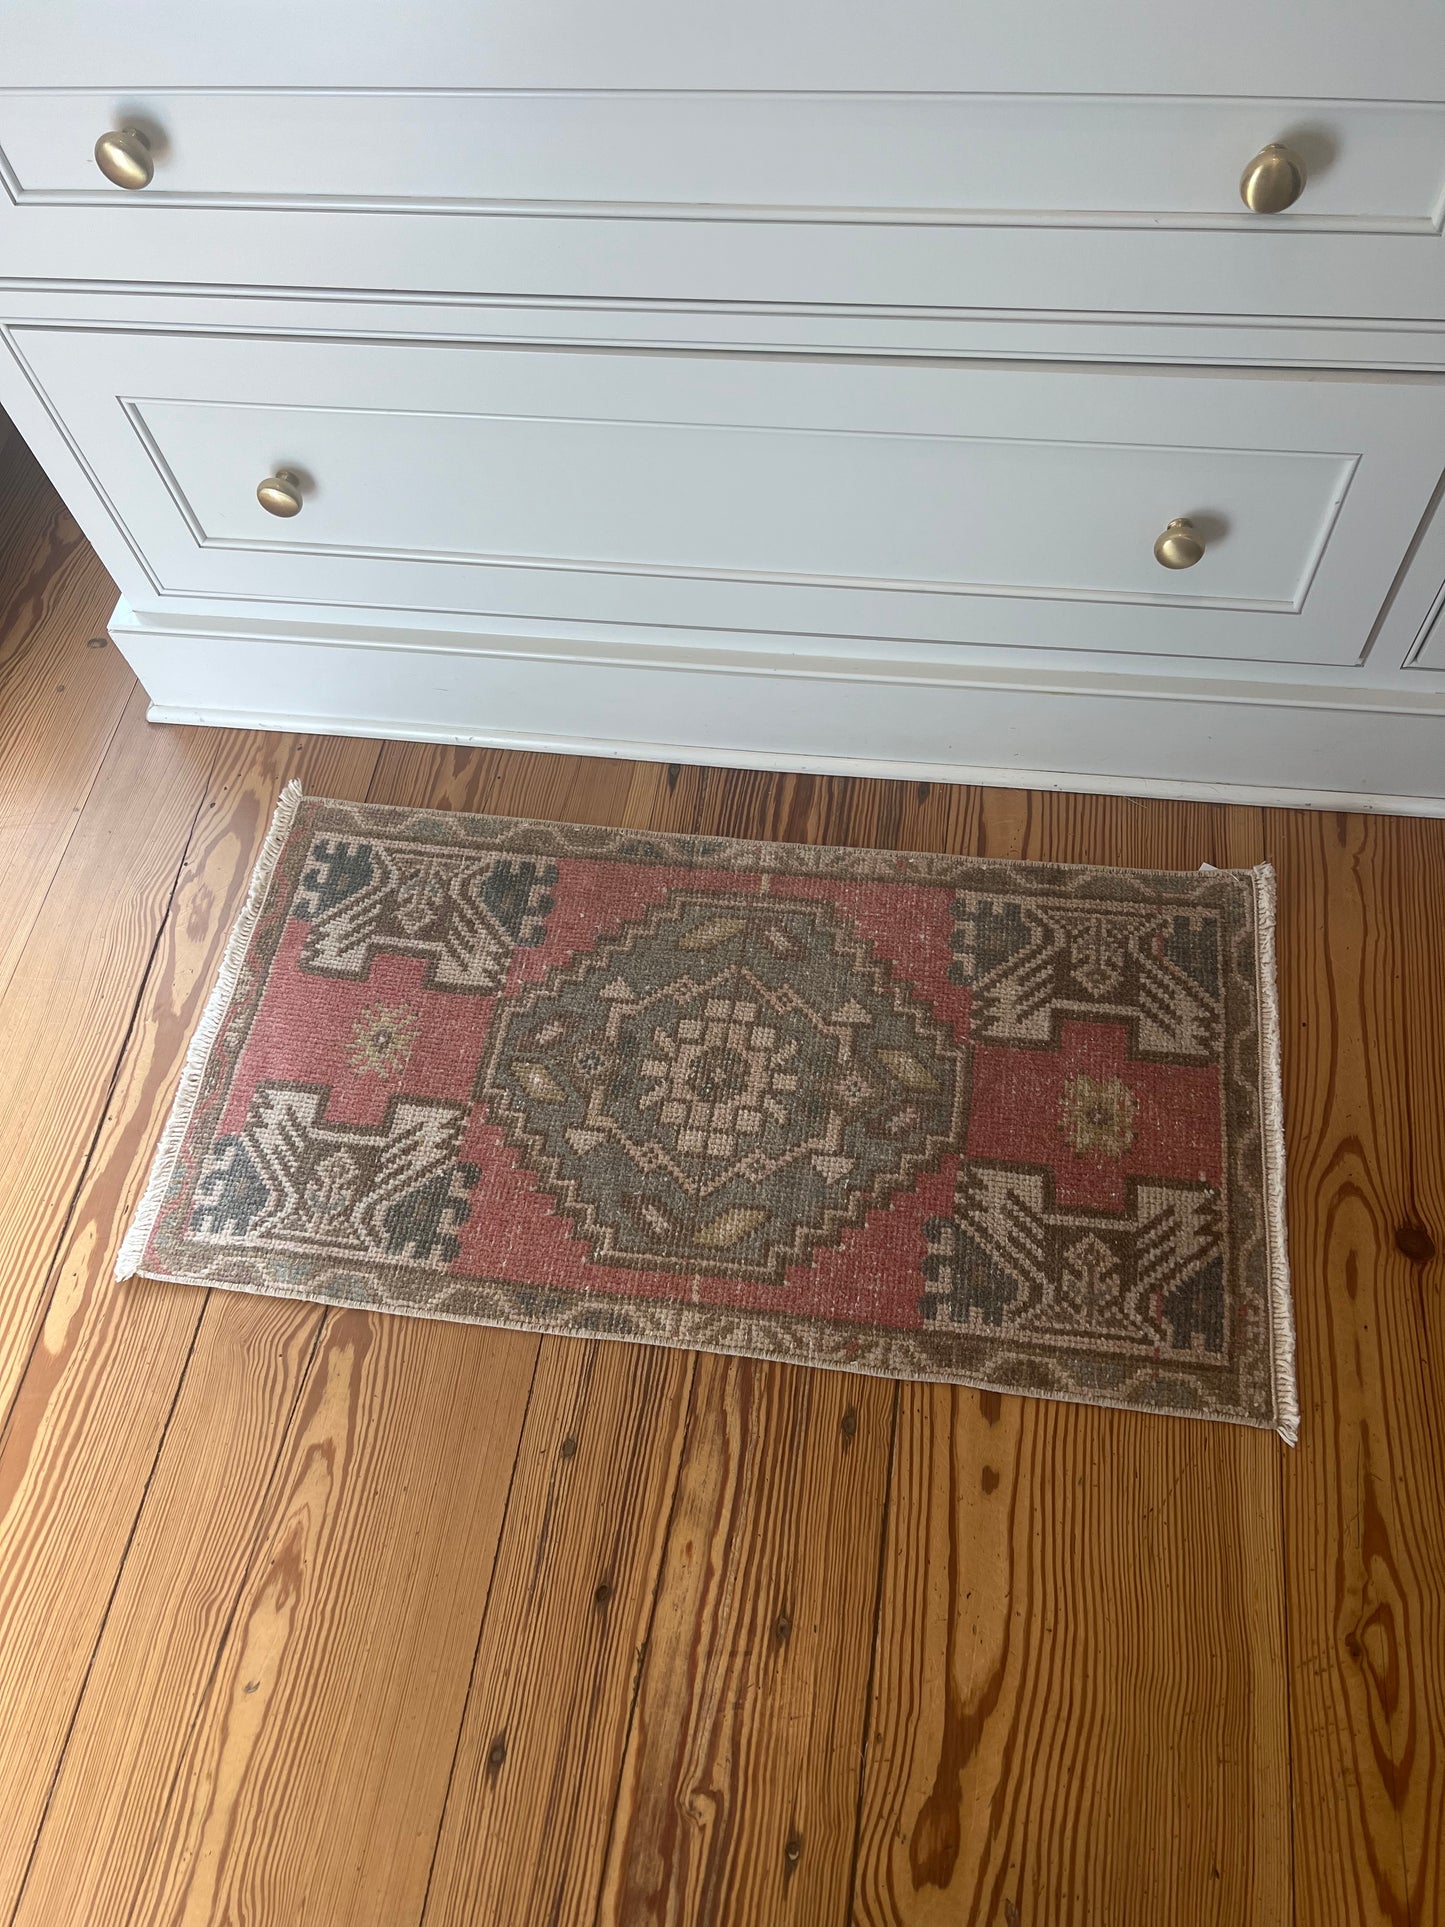 1'7" x 3'1" Small Rug